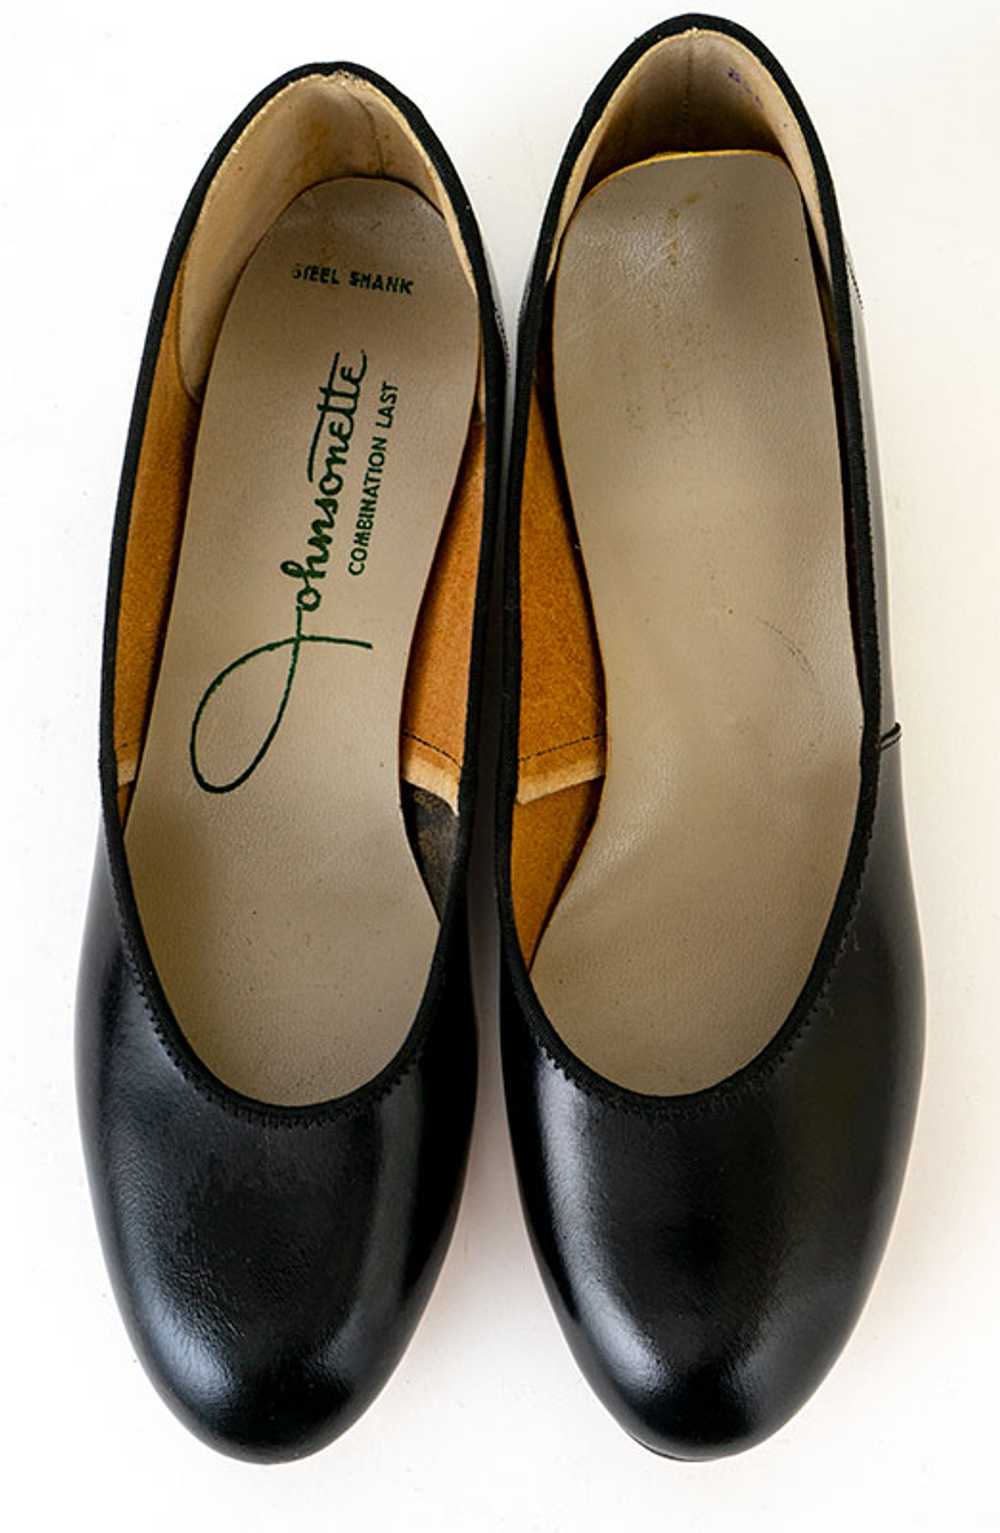 Patent Leather Ballet Flats - image 1